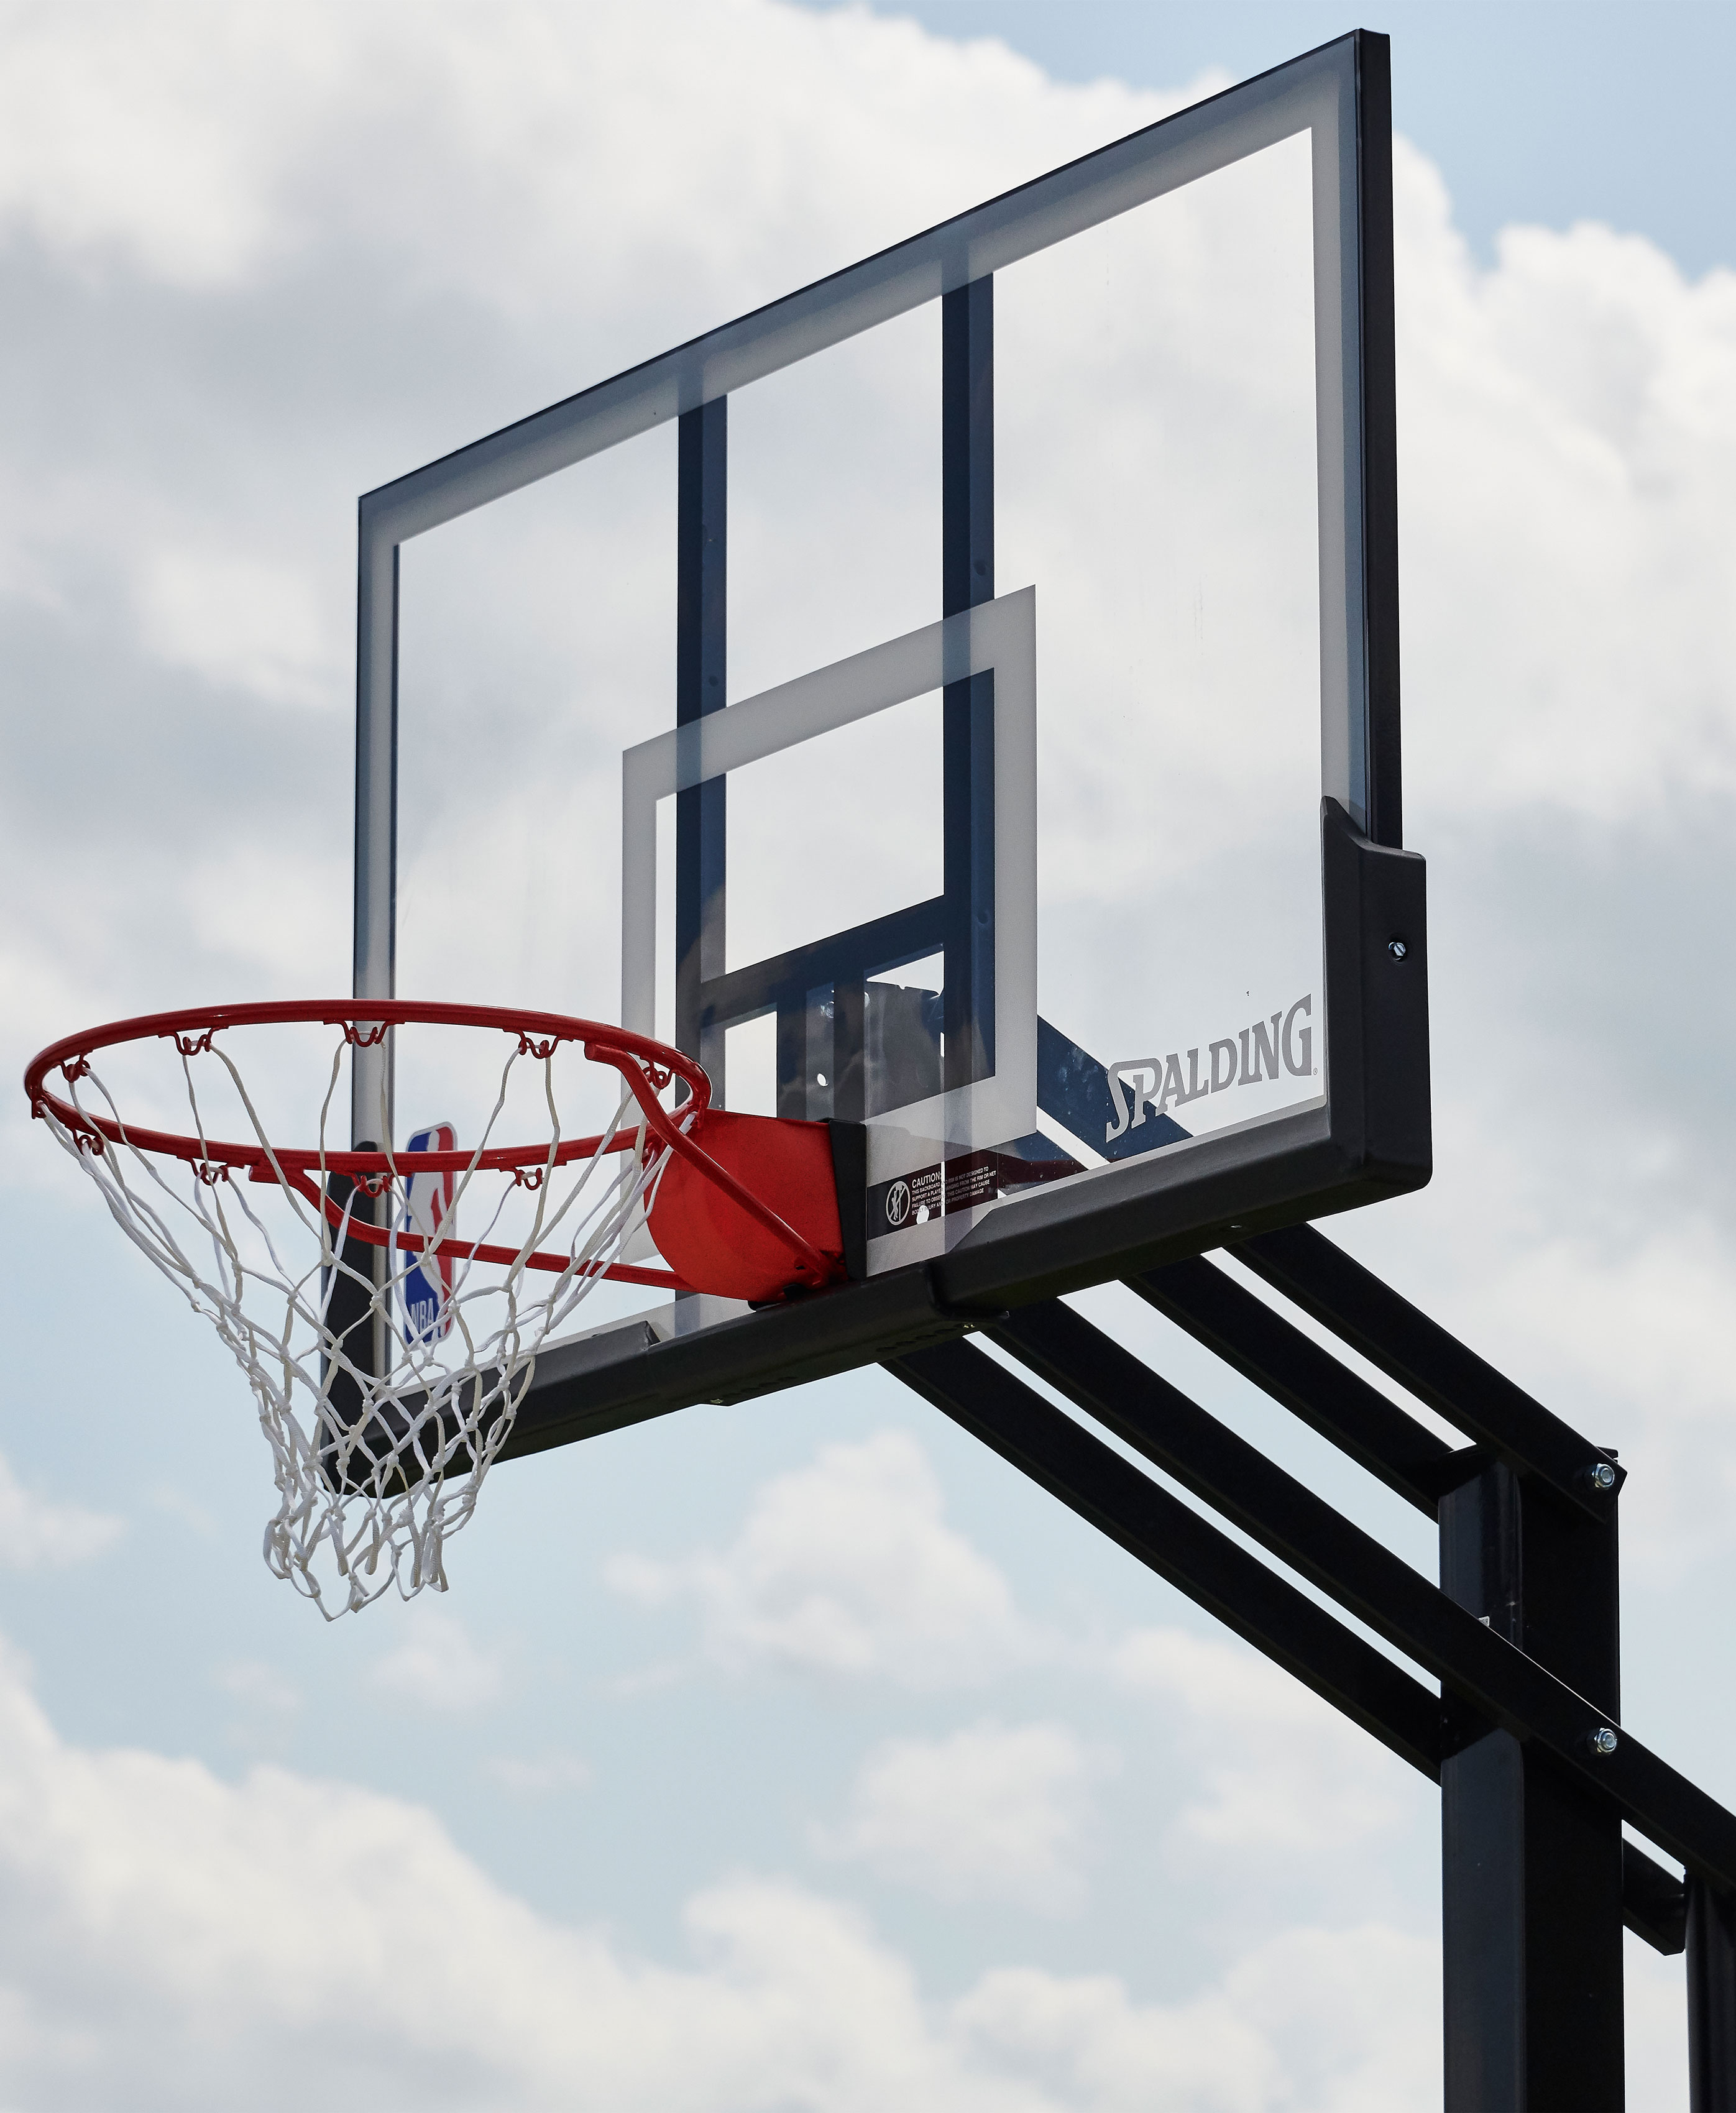 Spalding NBA 54 In. Portable Basketball System Screw Jack Hoop with Polycarbonate Backboard - image 5 of 9